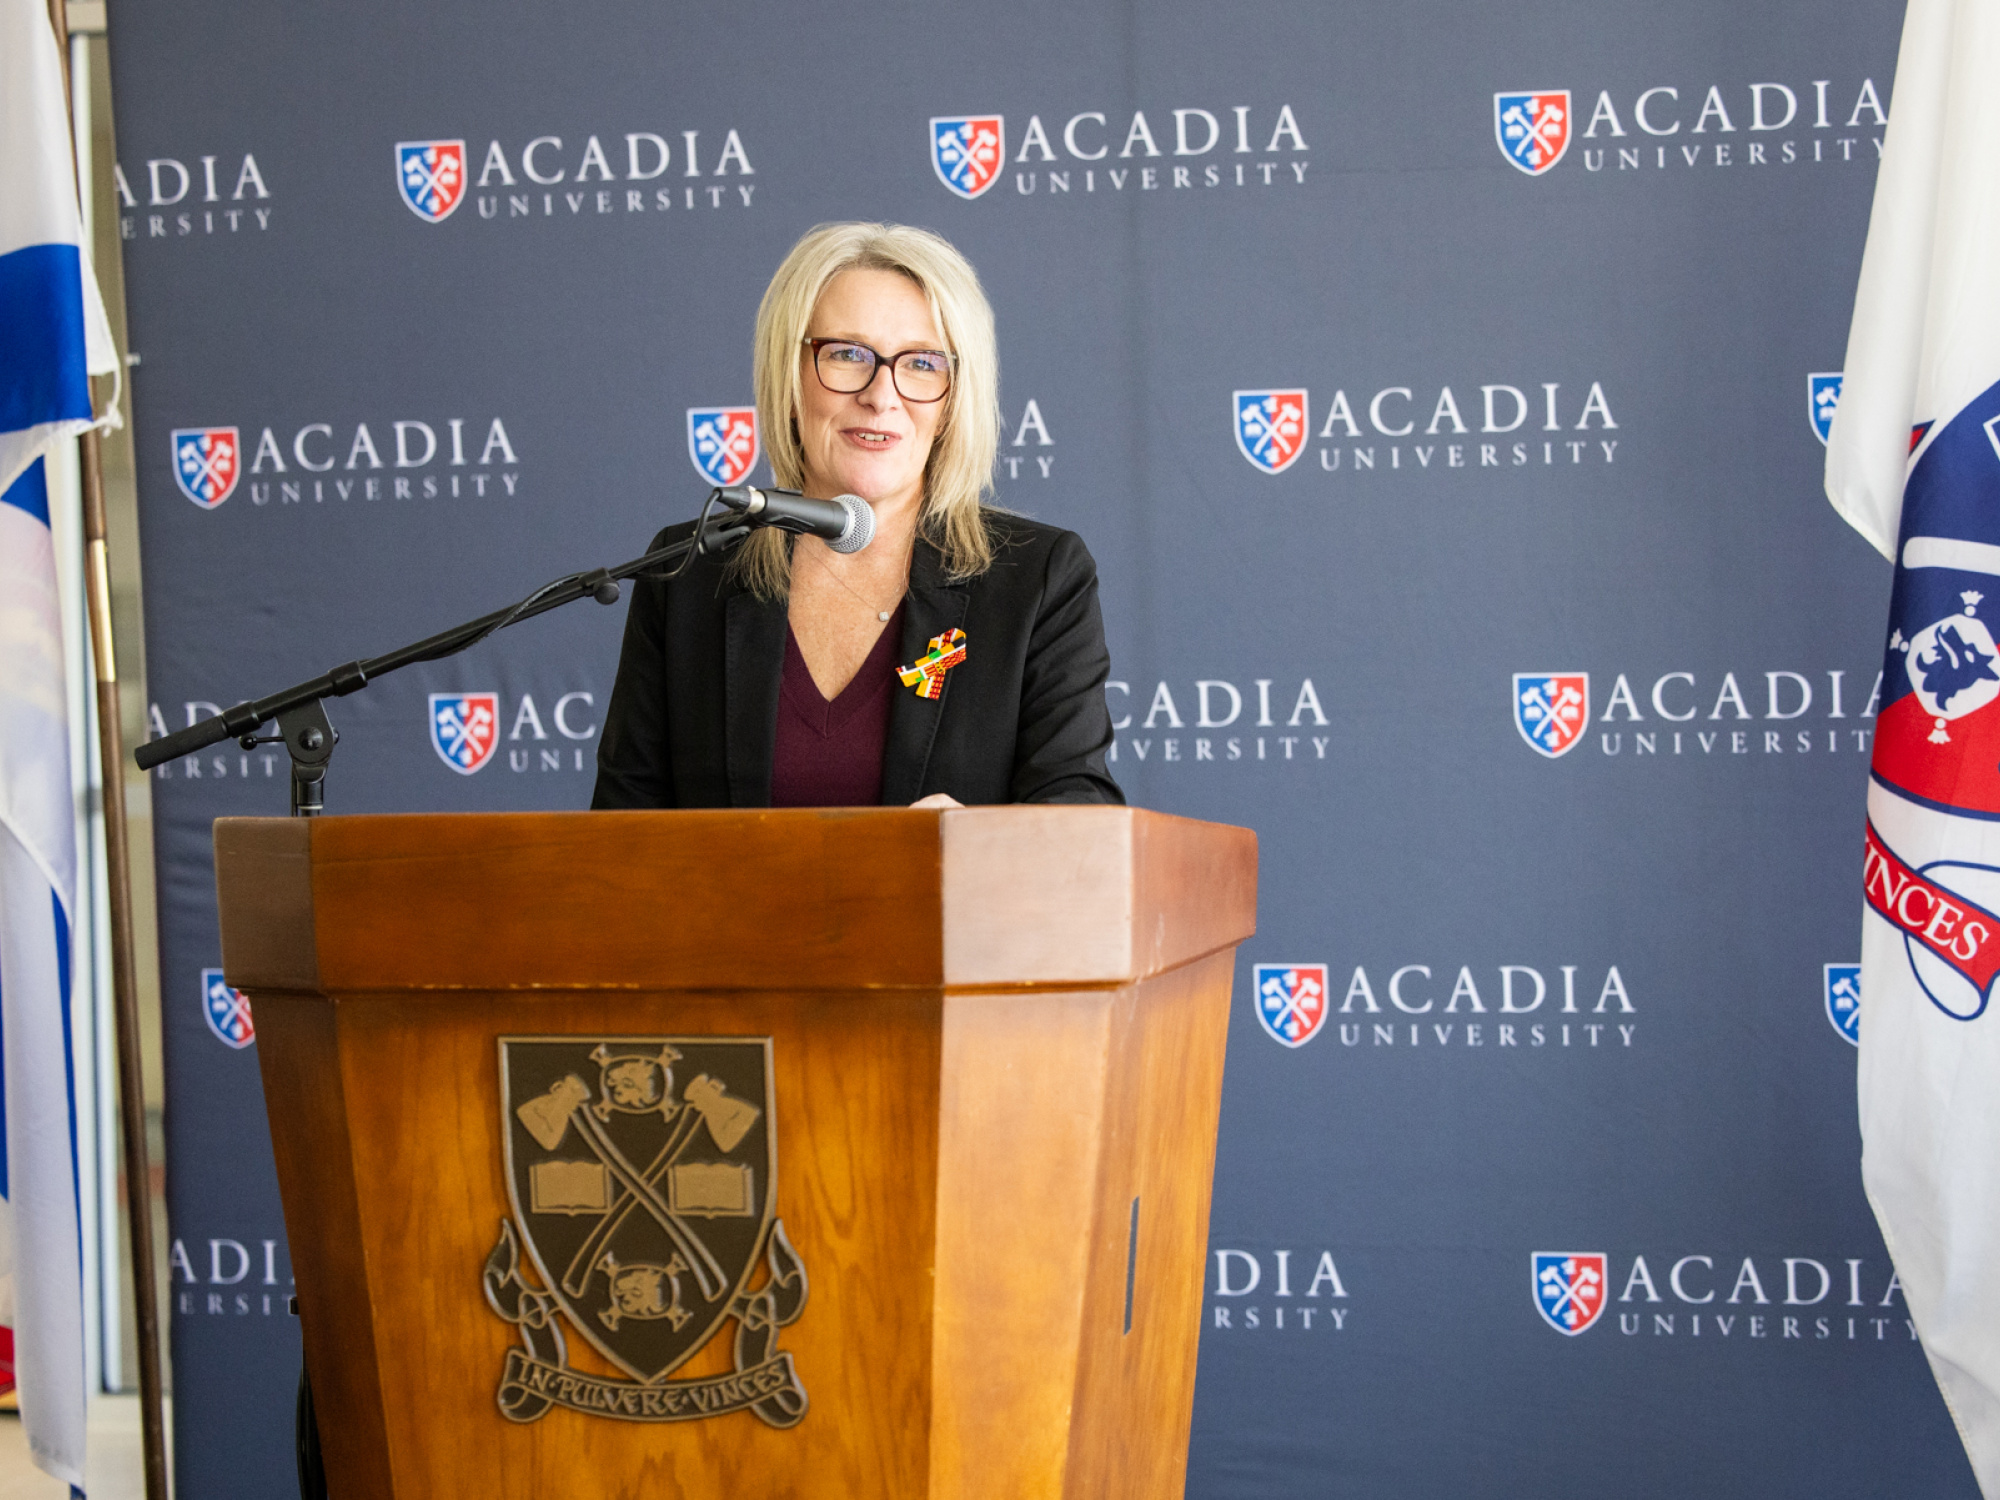 Melissa Sheehy-Richard, MLA for Hants West, welcomes the Acadia University community at the funding announcement. (Communications Nova Scotia)